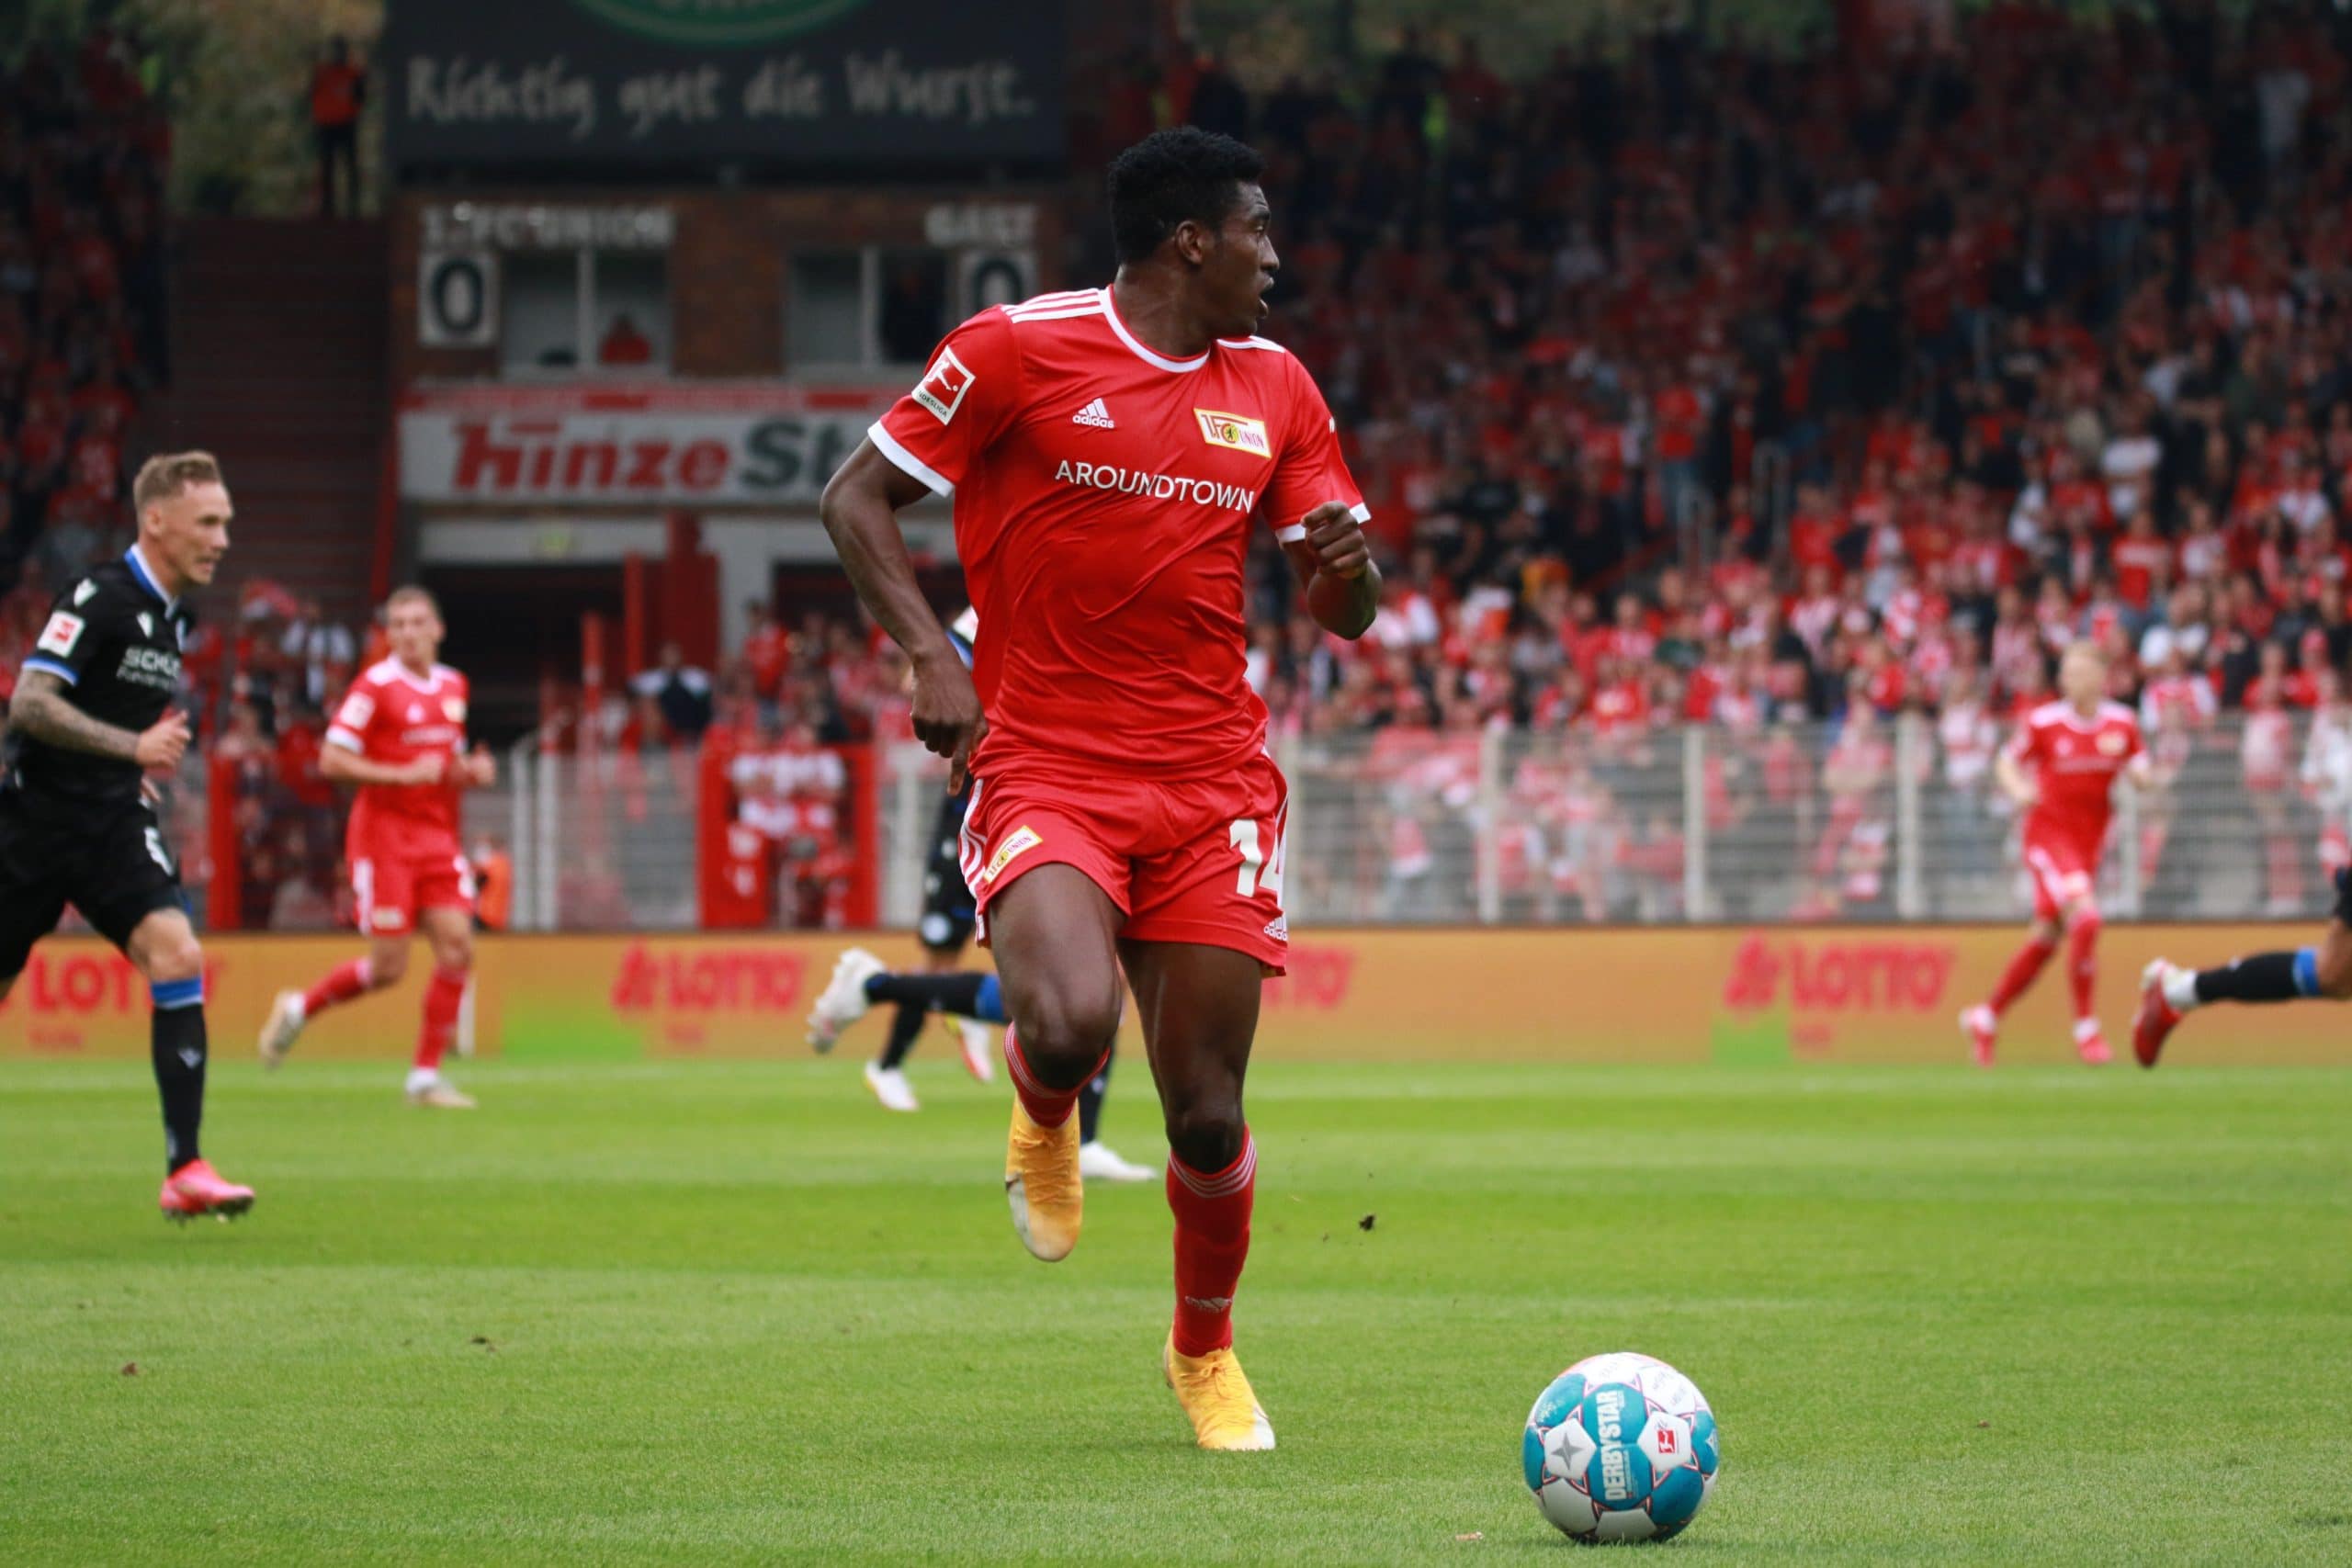 Awoniyi Set To Join Nottingham Forest For Record £17.5m Fee